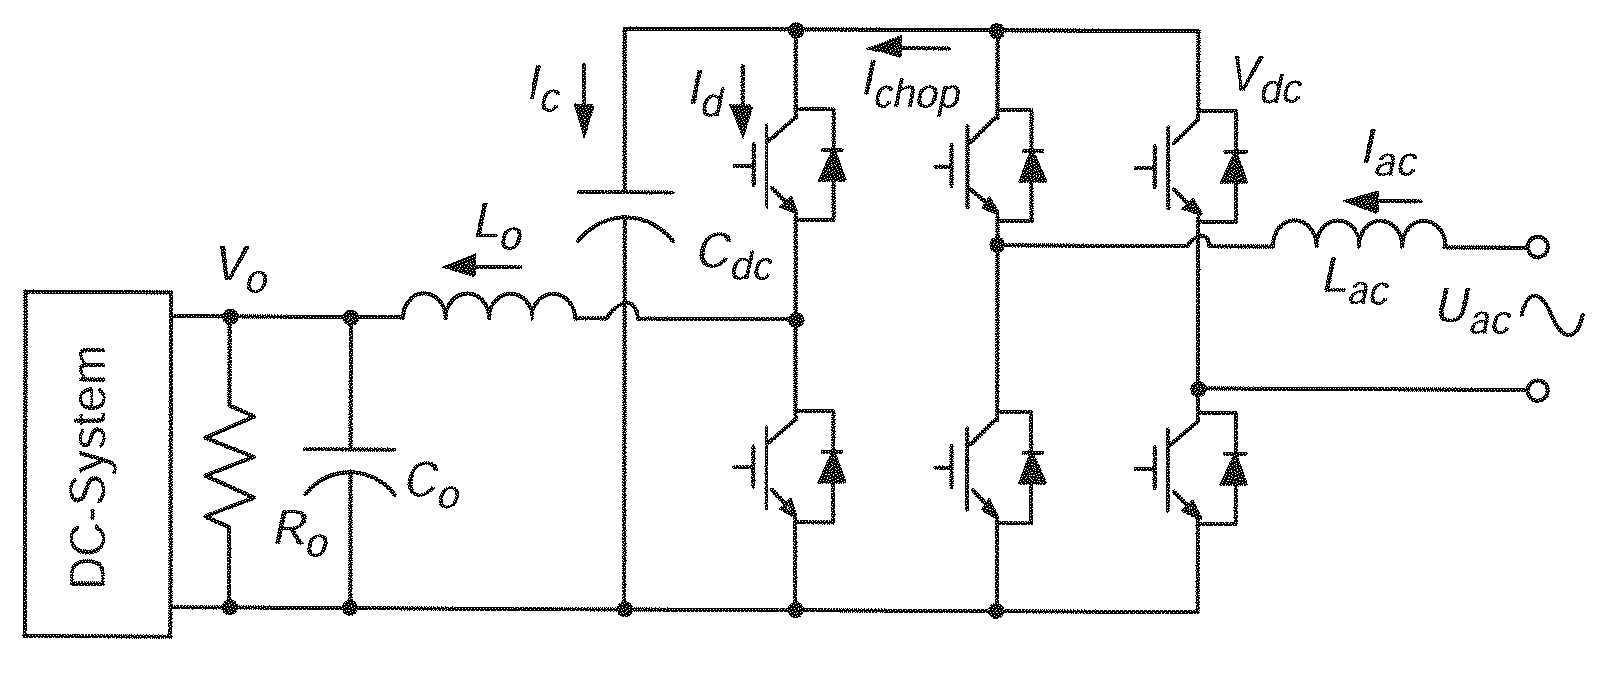 Two-stage single phase bi-directional pwm power converter with DC link capacitor reduction